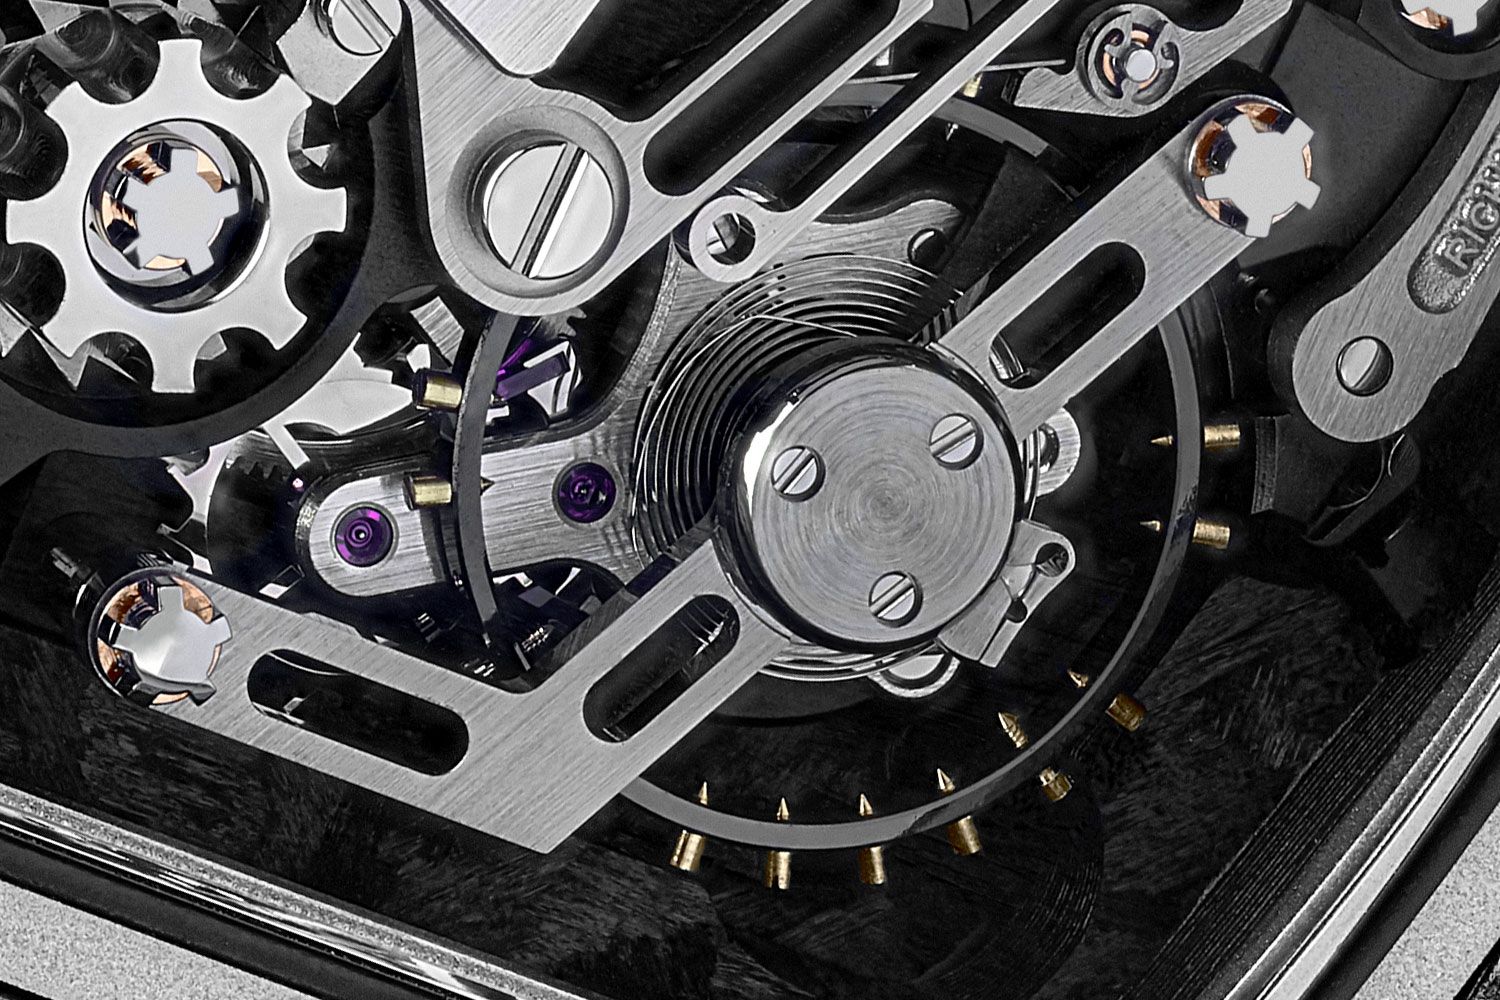 Richard Mille Flyback Chronograph Rm